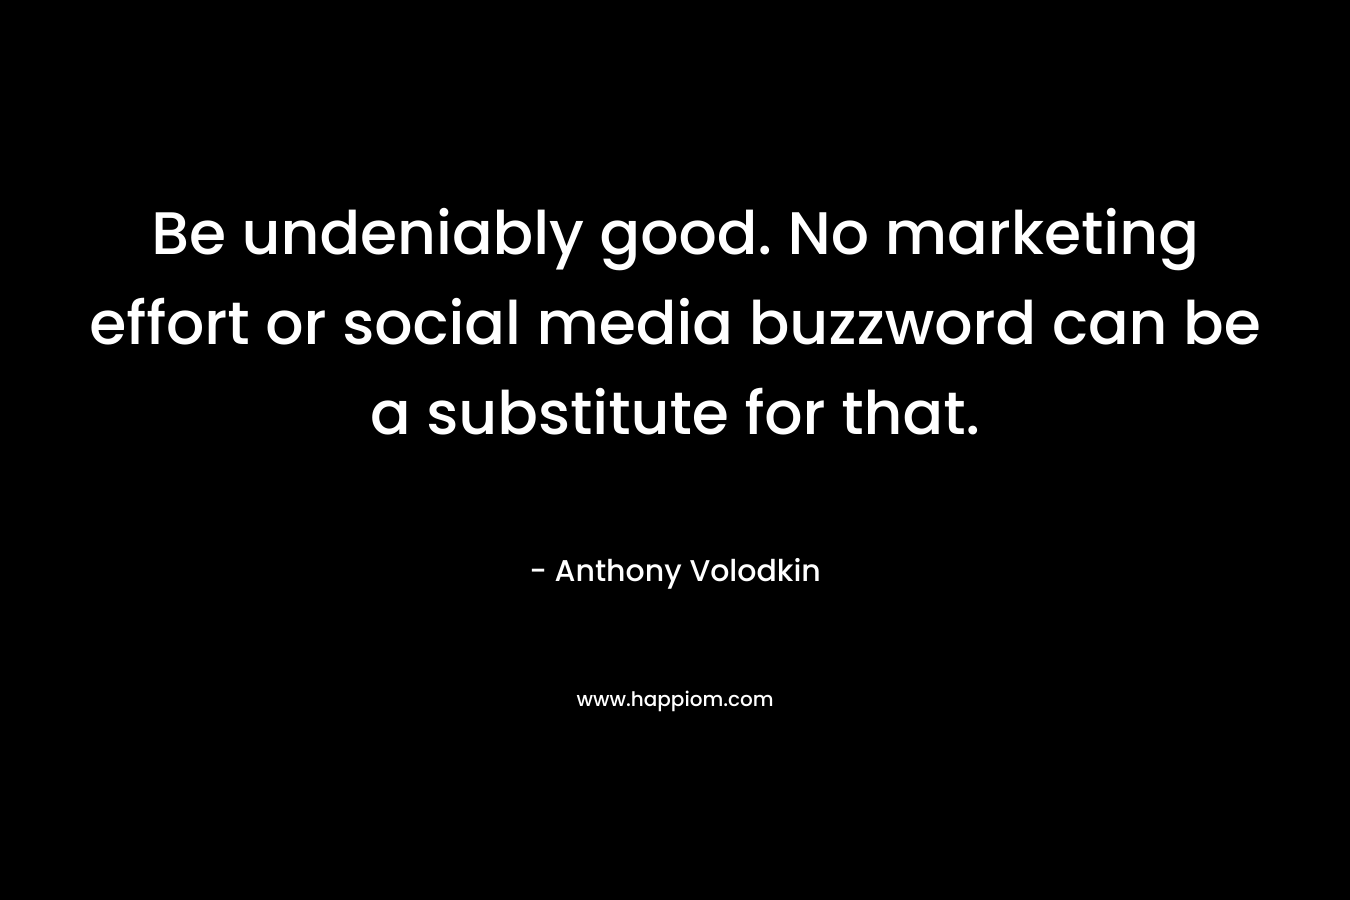 Be undeniably good. No marketing effort or social media buzzword can be a substitute for that. – Anthony Volodkin